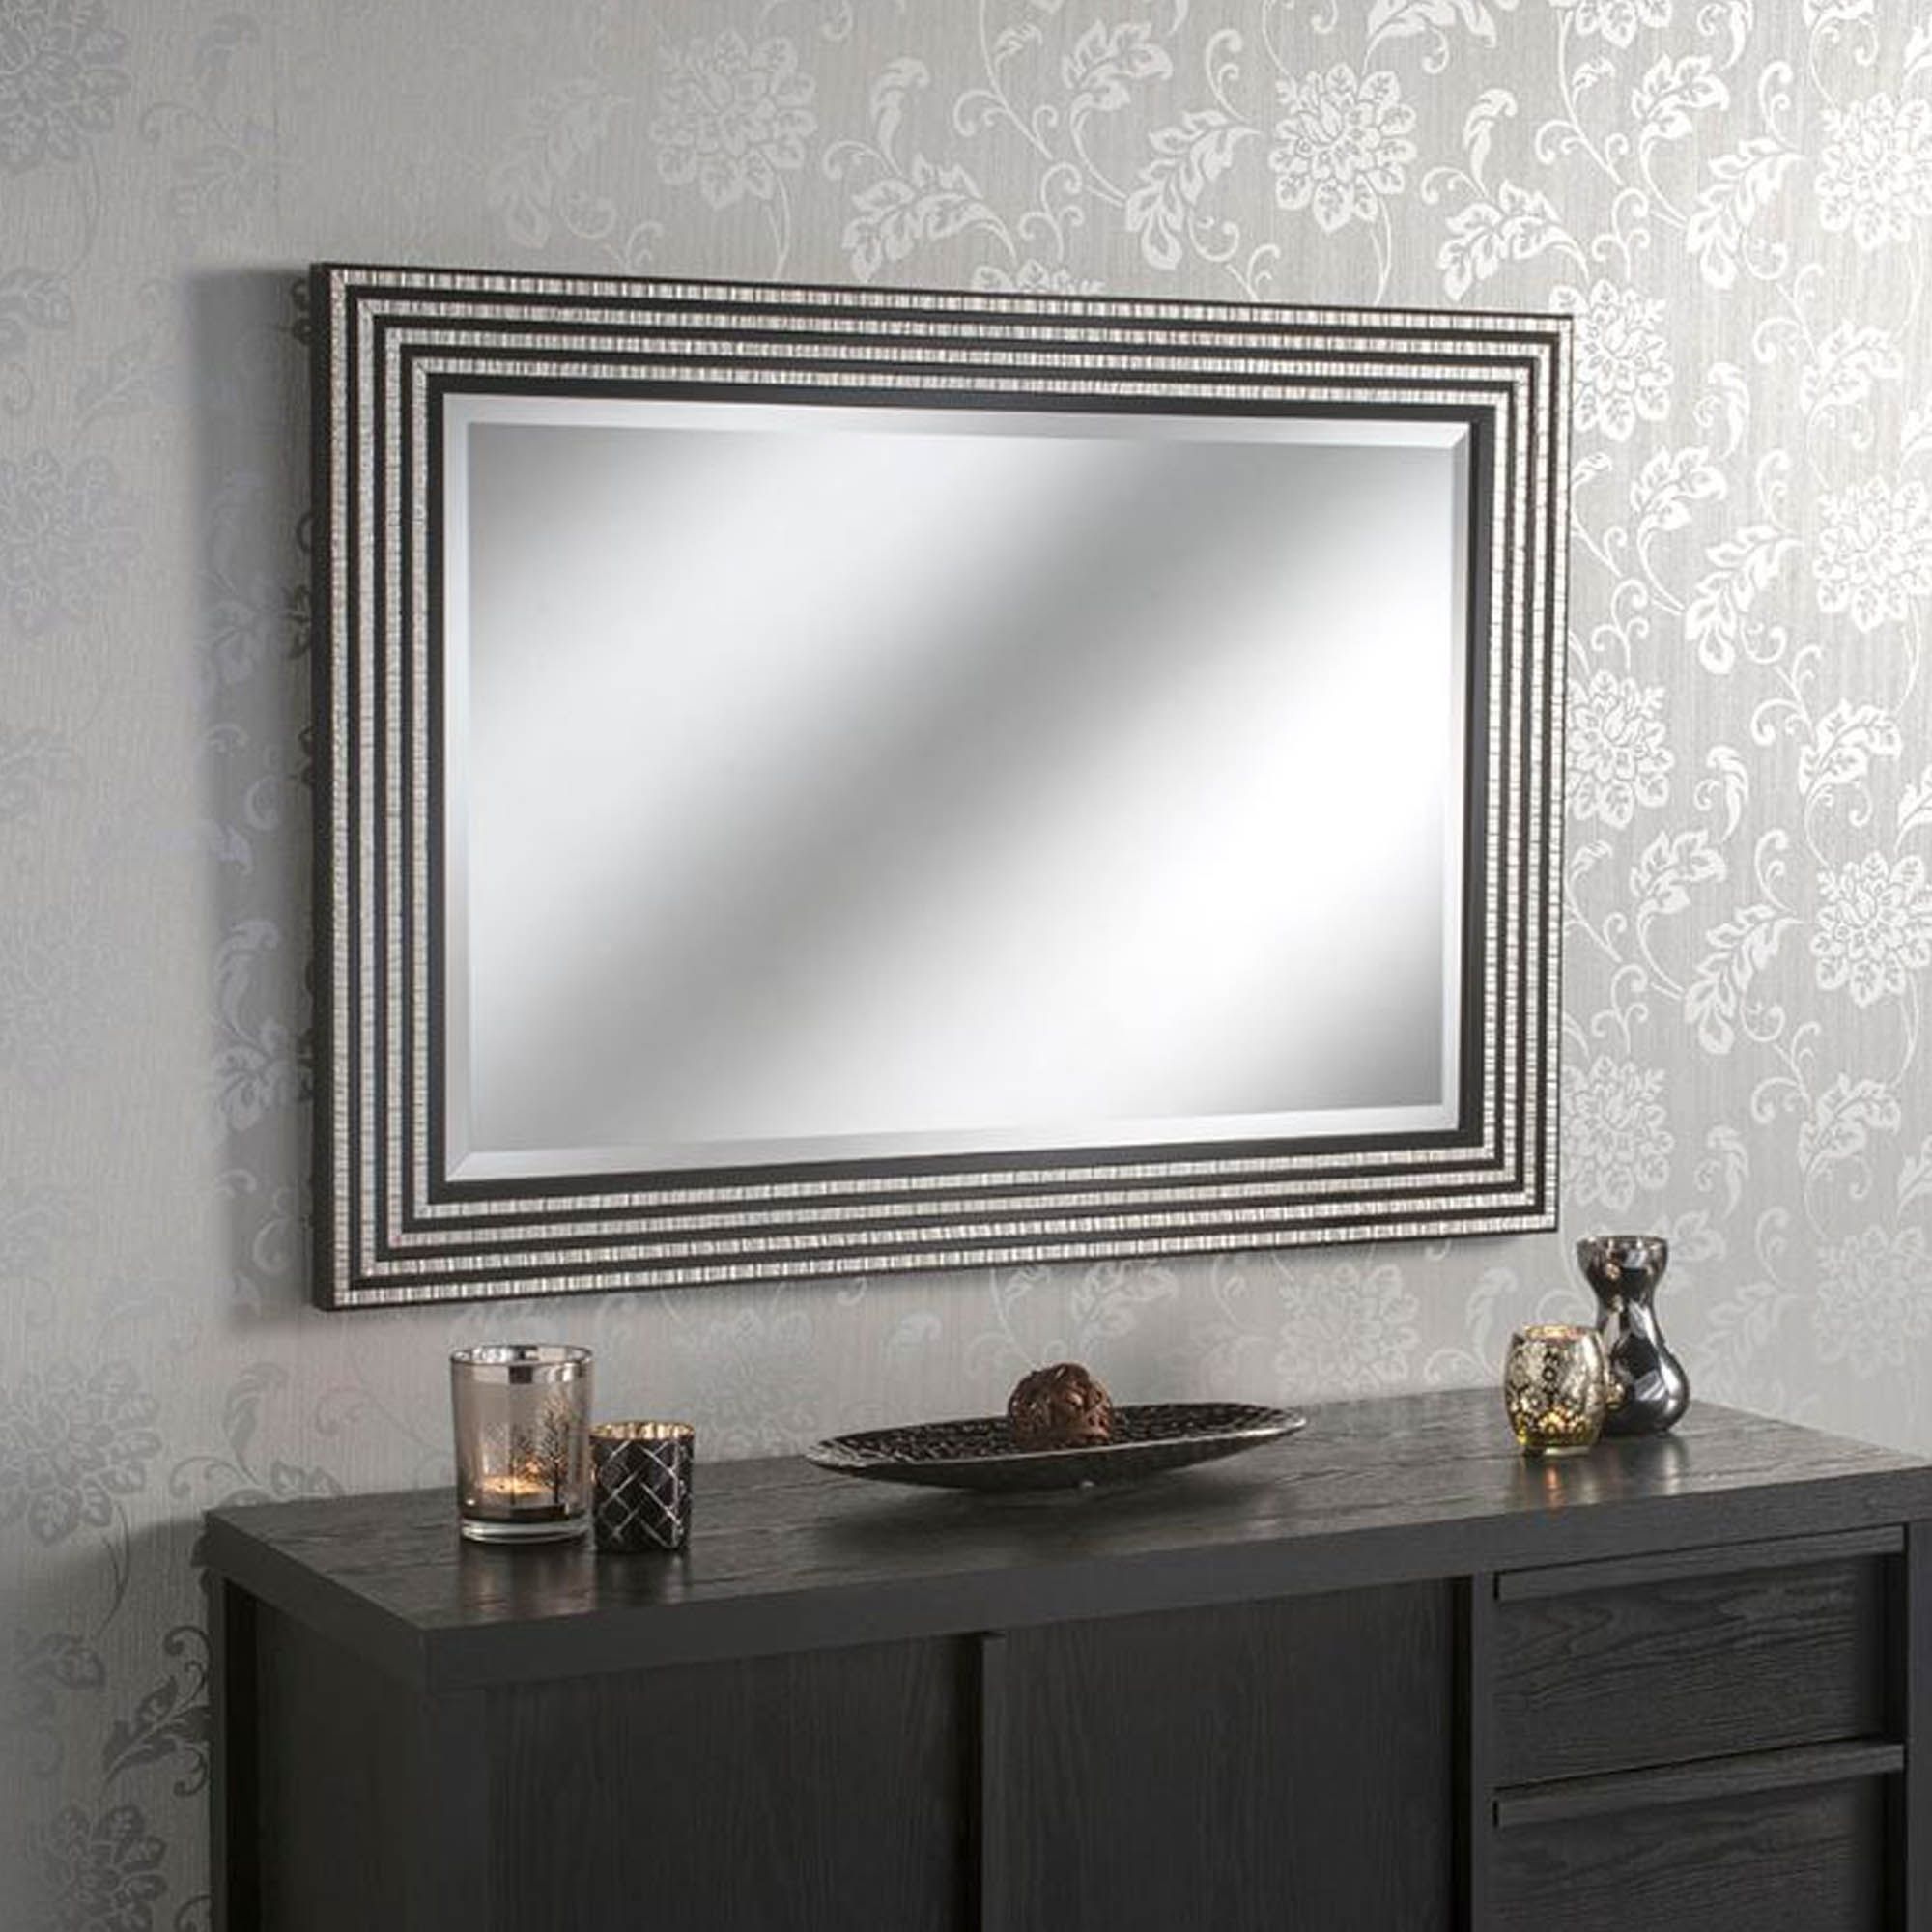 Black And Silver Line Rectangular Wall Mirror | Homesdirect365 With Regard To Black Wall Mirrors (View 3 of 15)